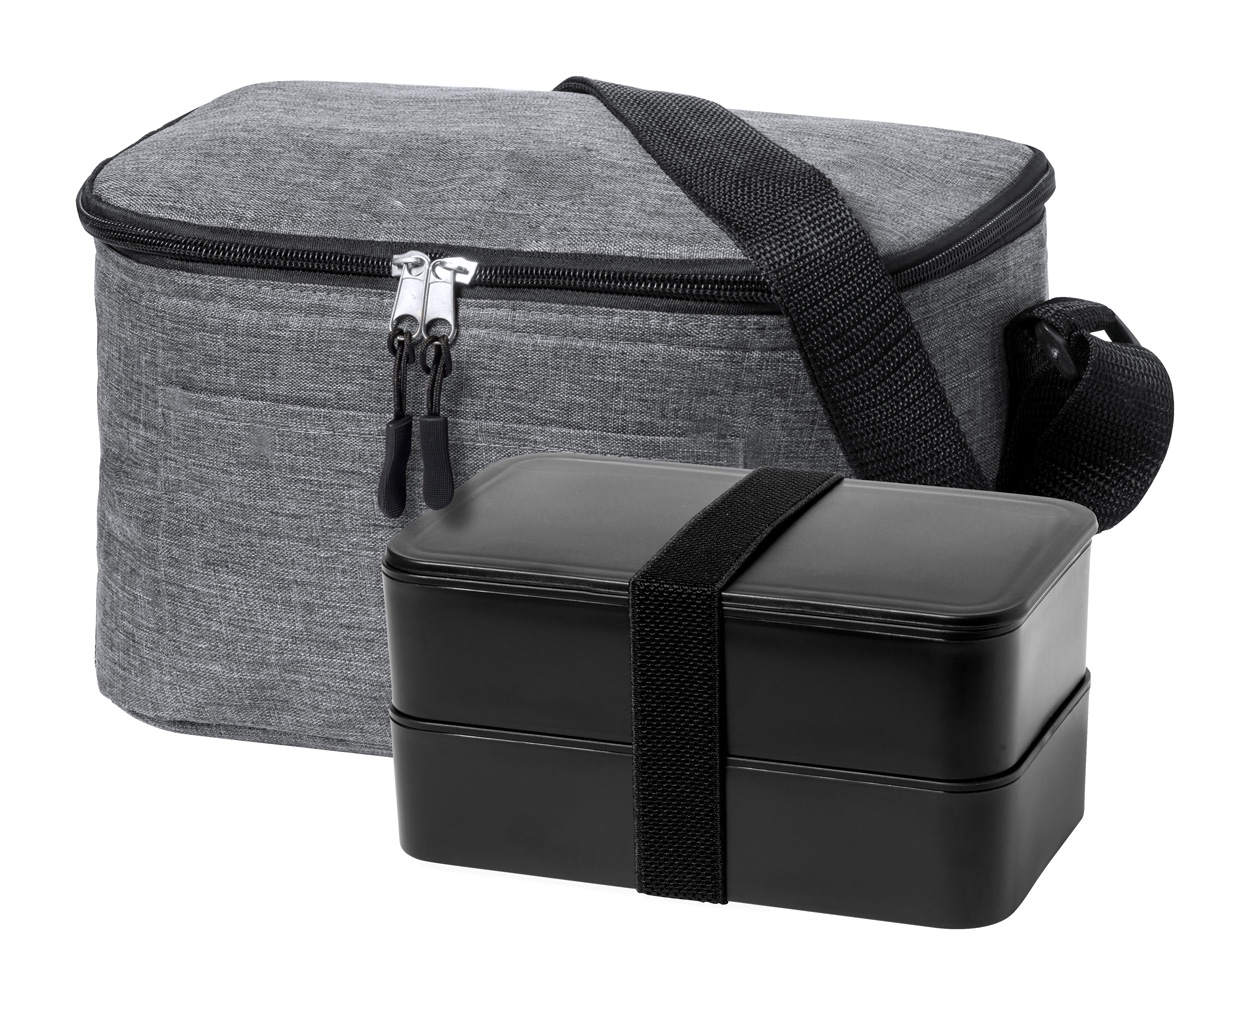 Glaxia cooler bag and lunch box Grey